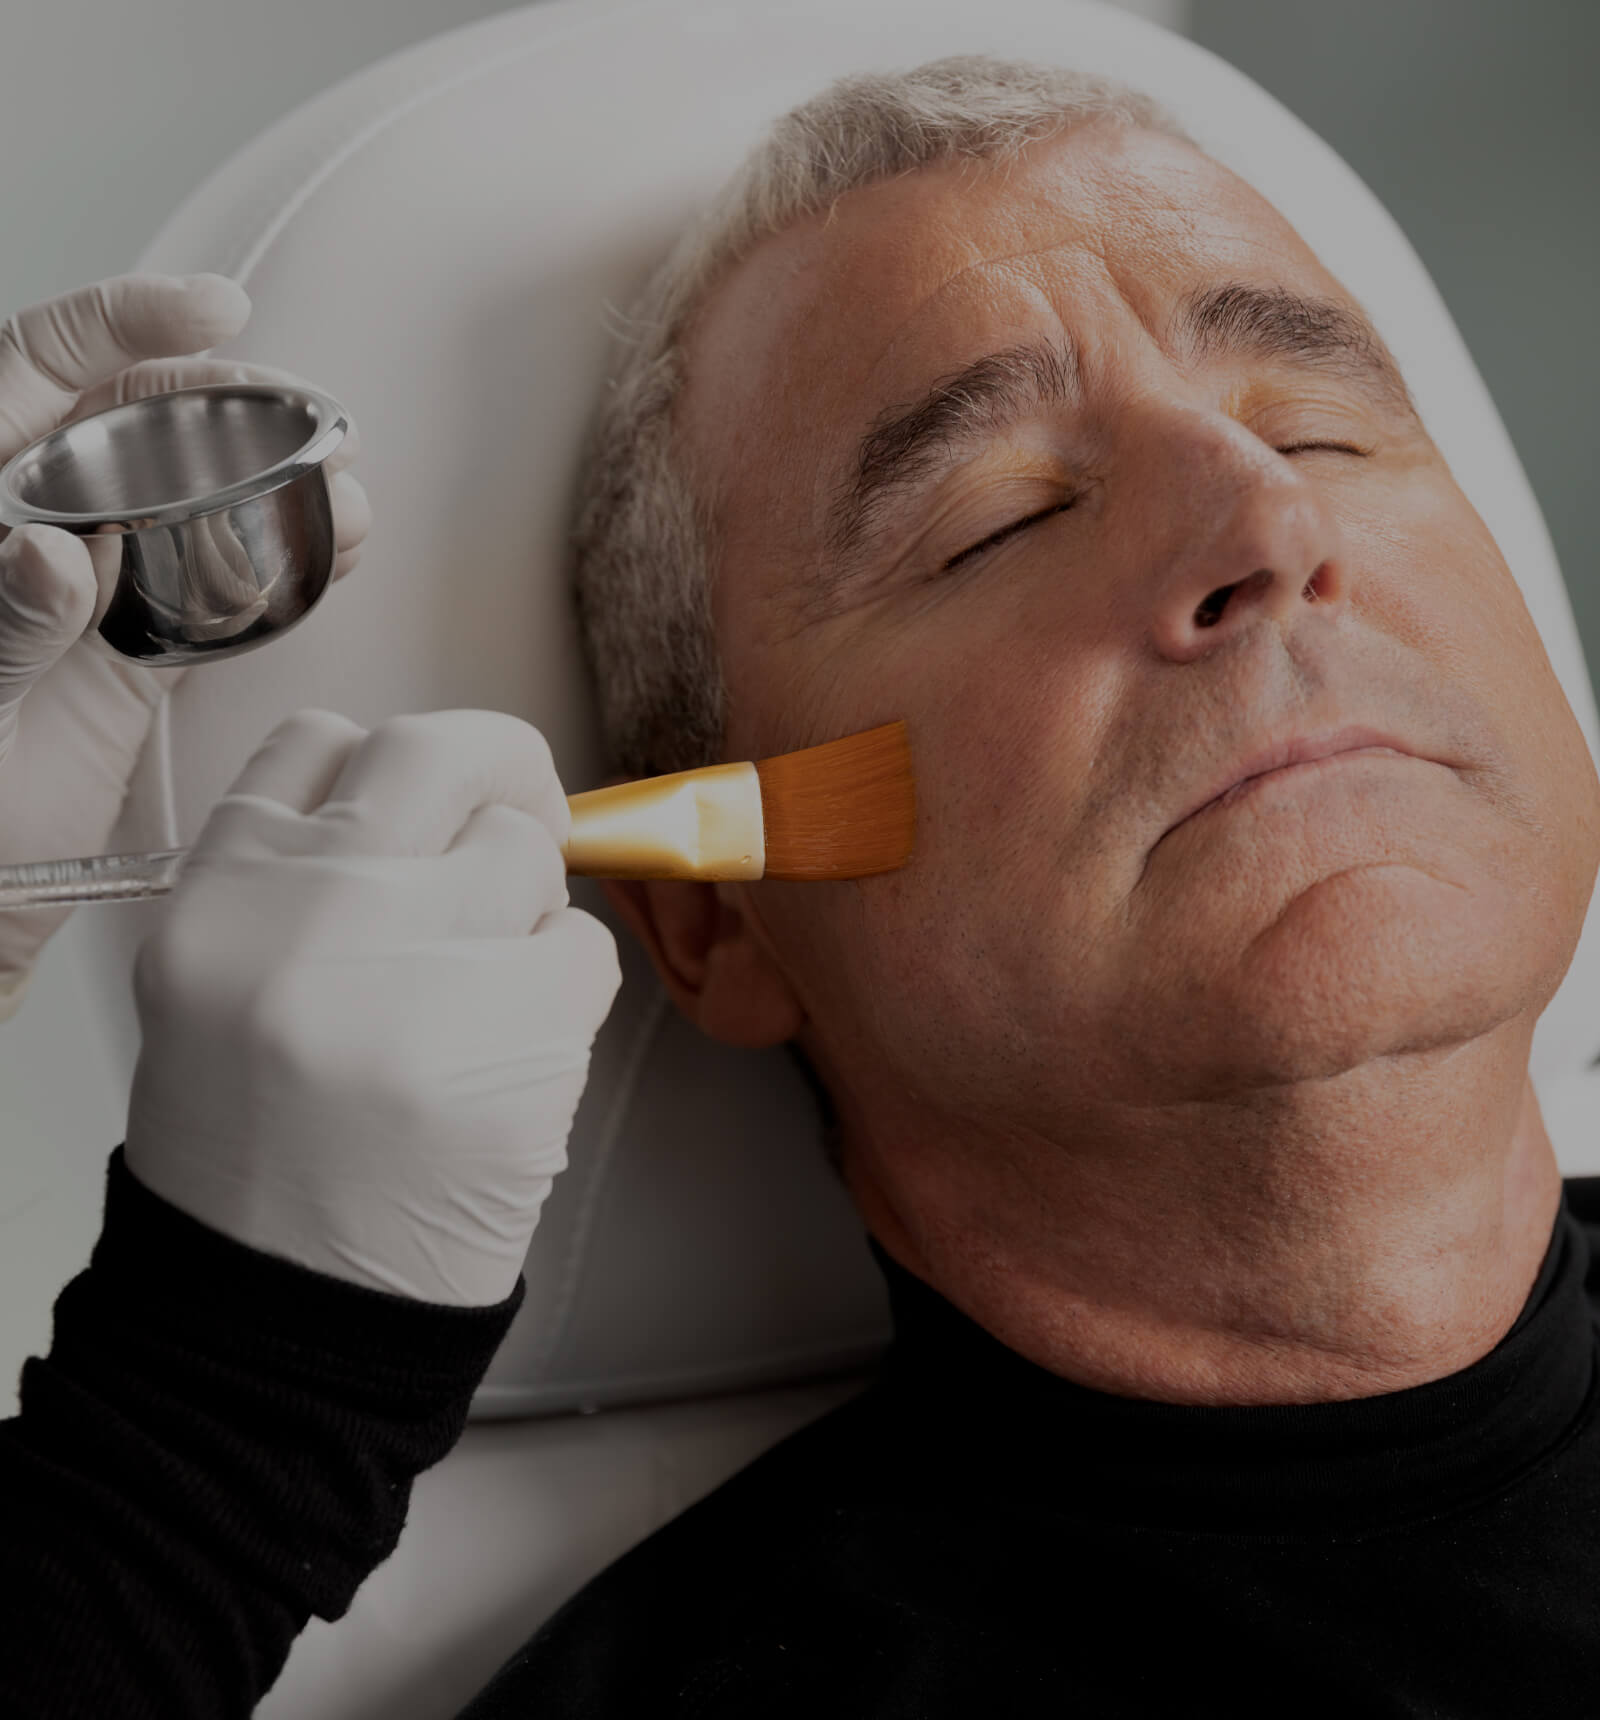 A technician from Clinique Chloé applying a chemical peel to a male patient's face with a brush